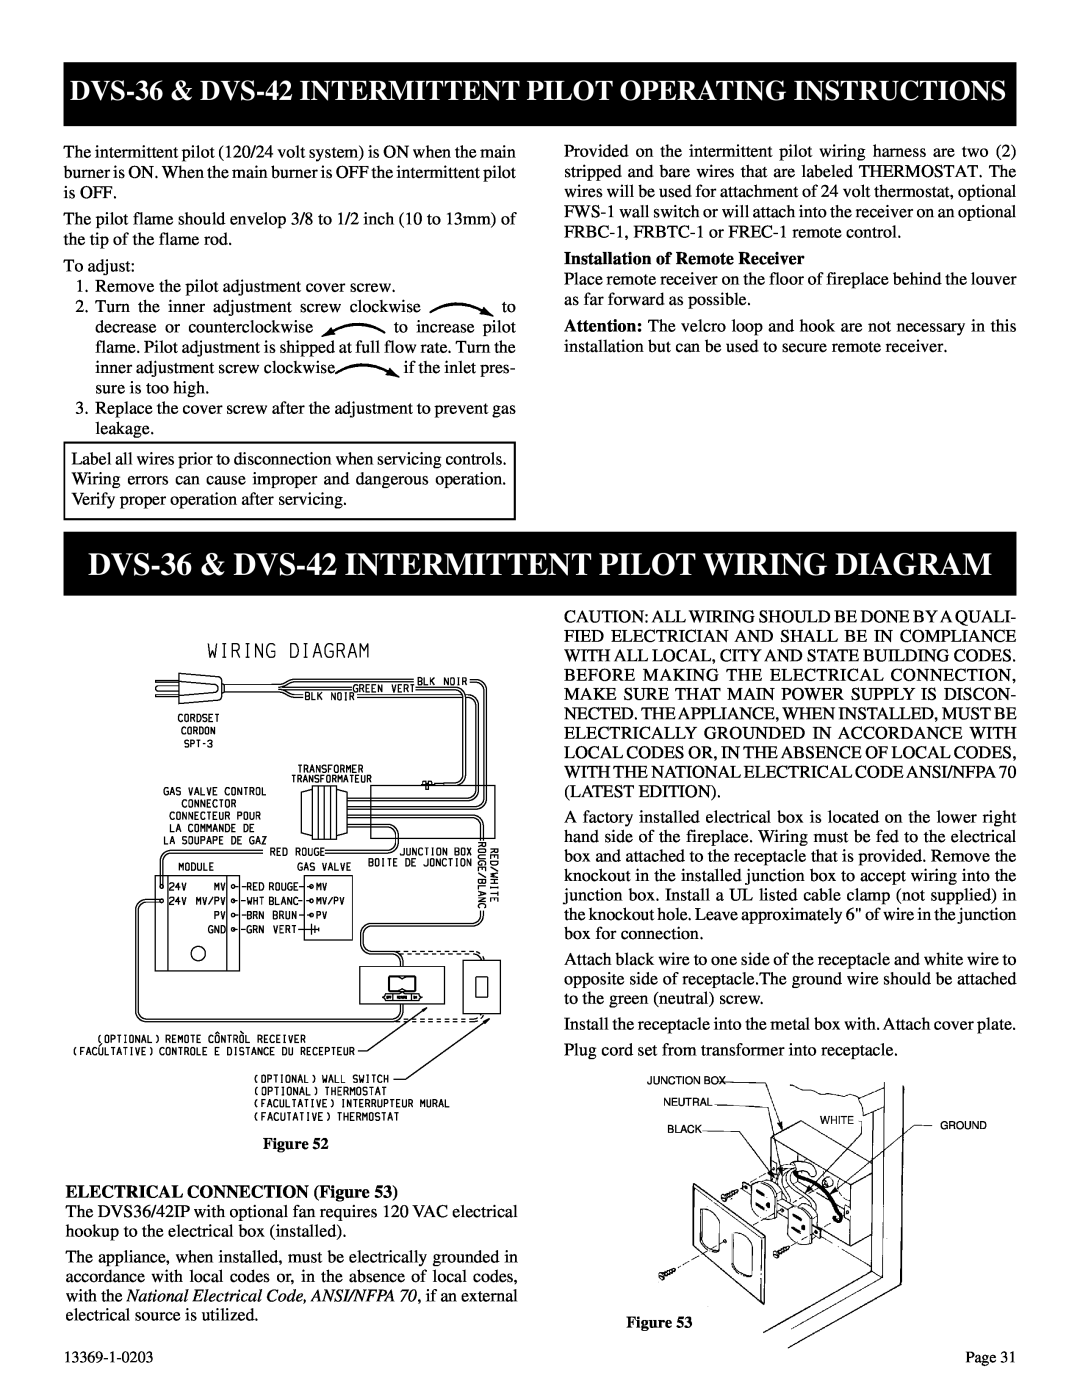 DVS 30-2 DVS-36& DVS-42INTERMITTENT PILOT WIRING DIAGRAM, Installation of Remote Receiver, ELECTRICAL CONNECTION Figure 